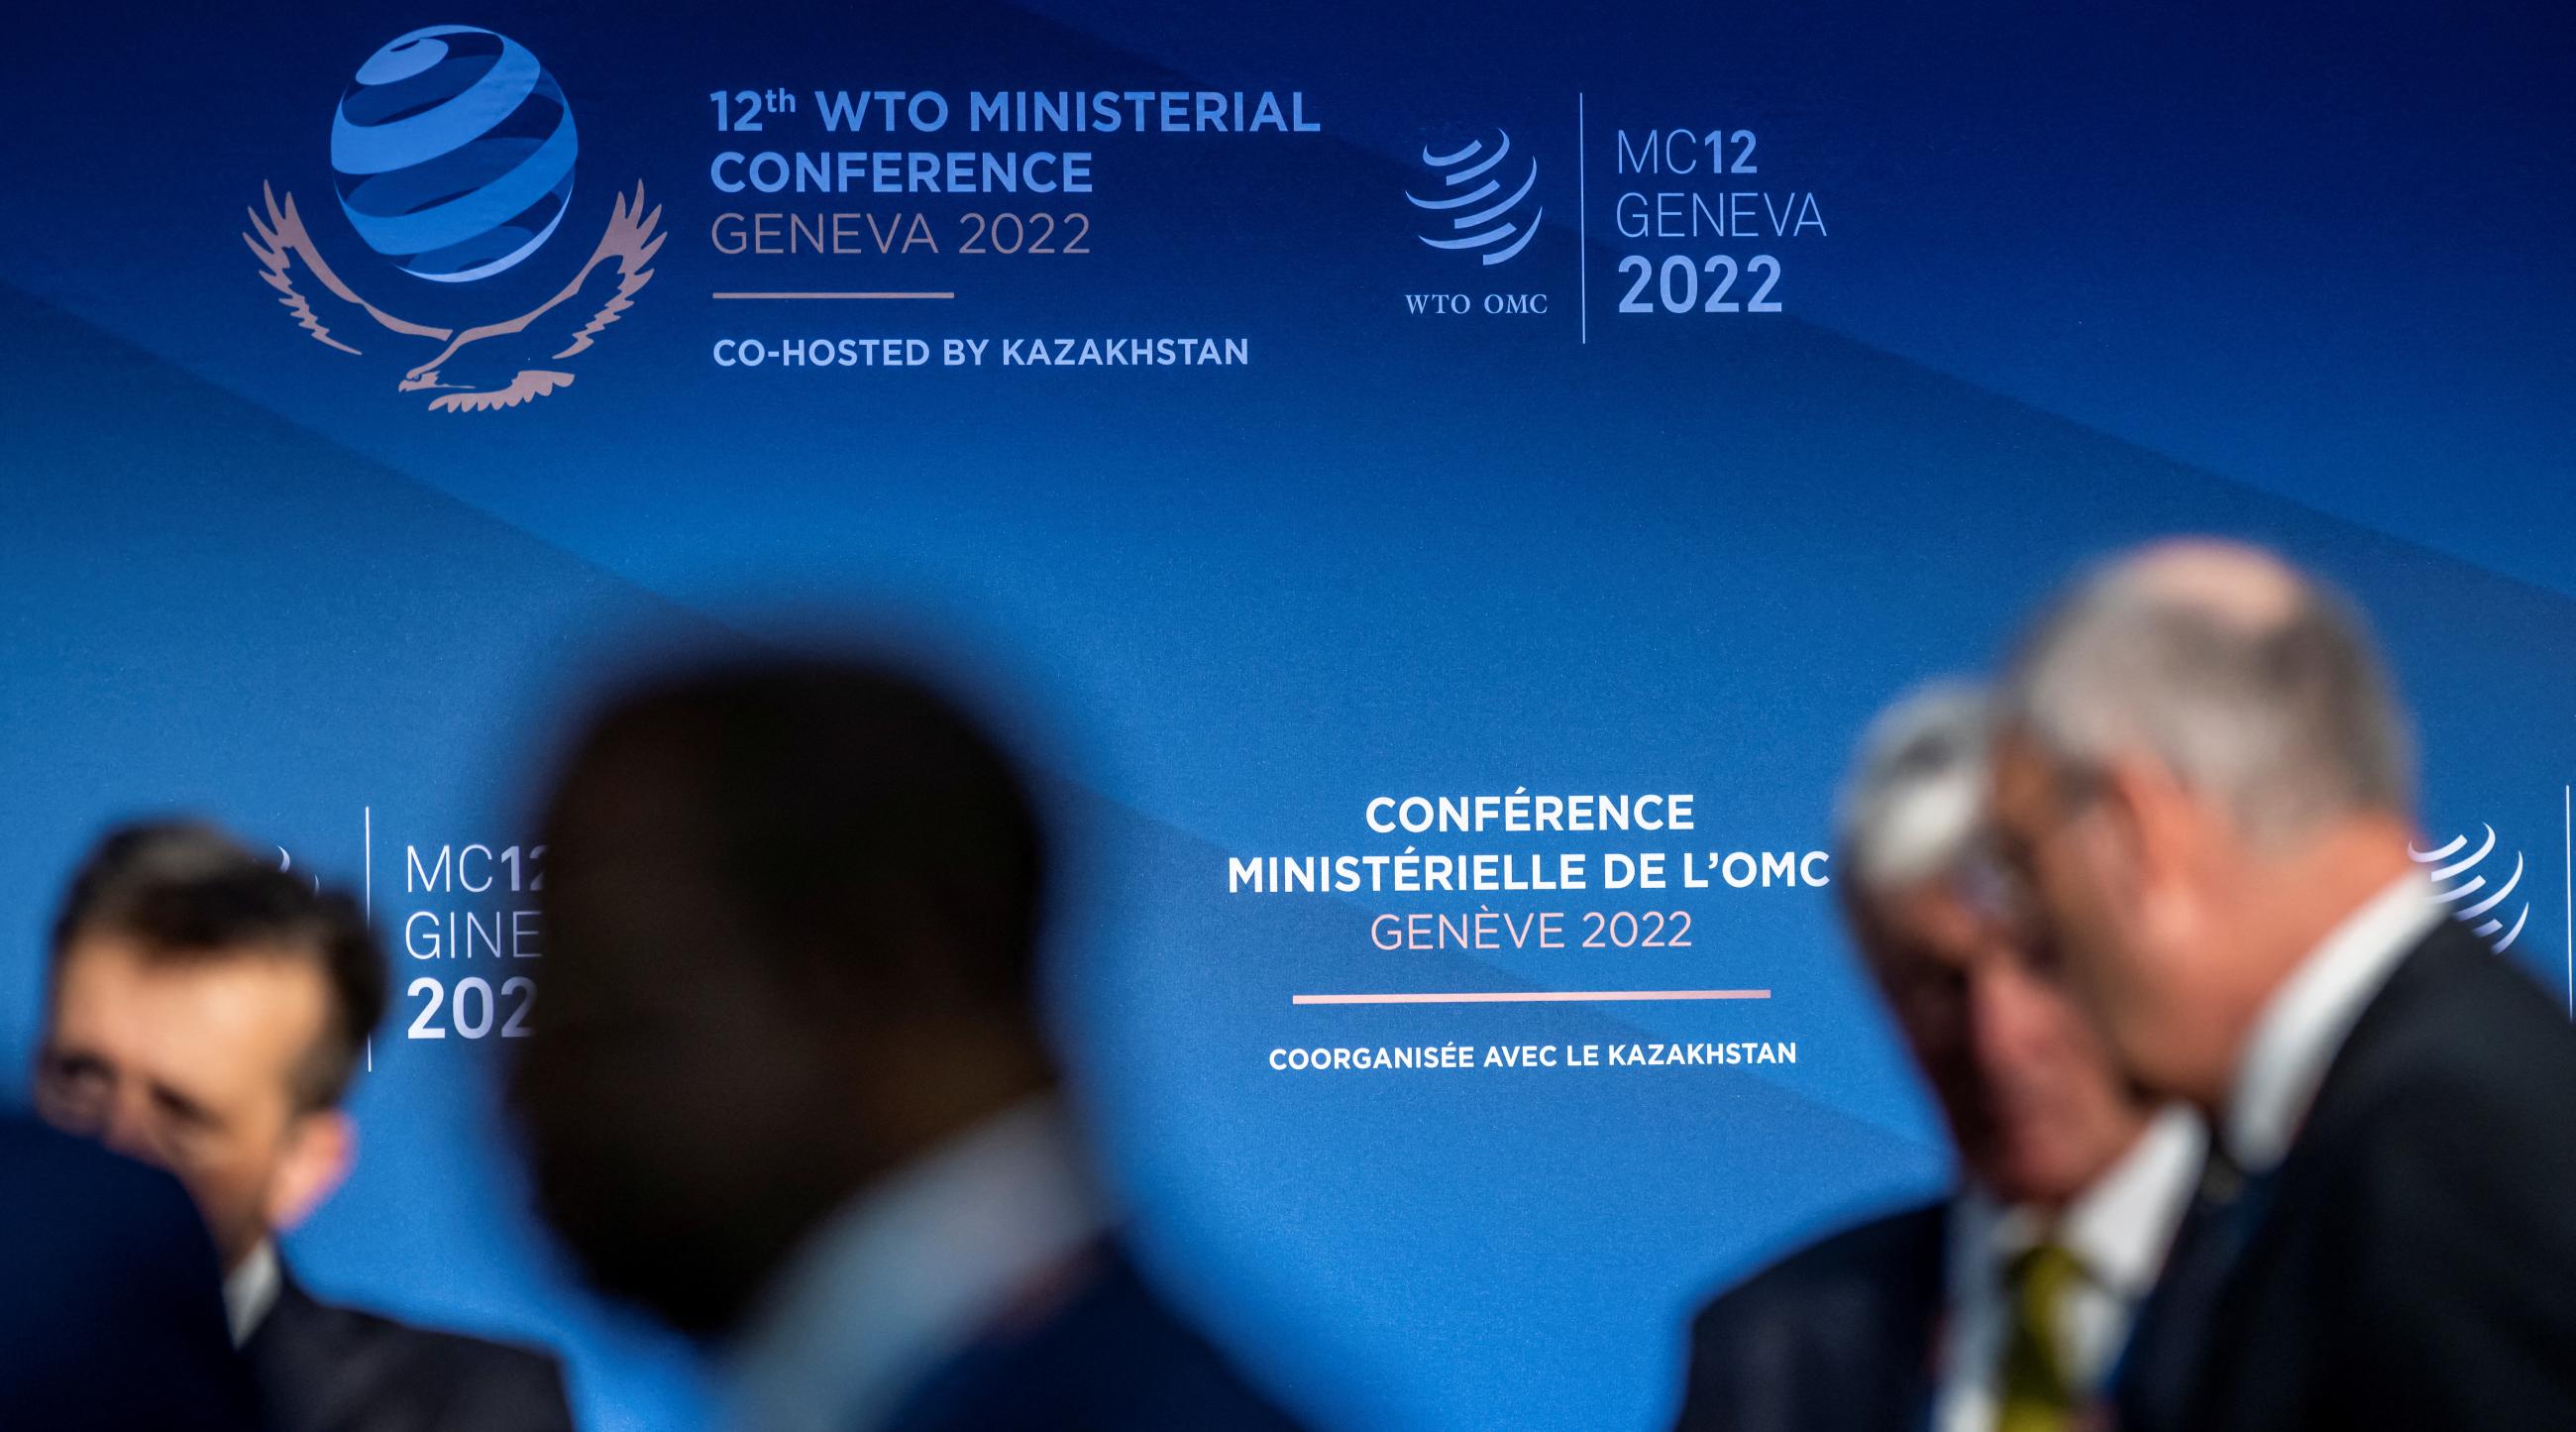 Ambassadors stand in front of a sign for the 12th Ministerial Conference at the headquarters of the World Trade Organization.